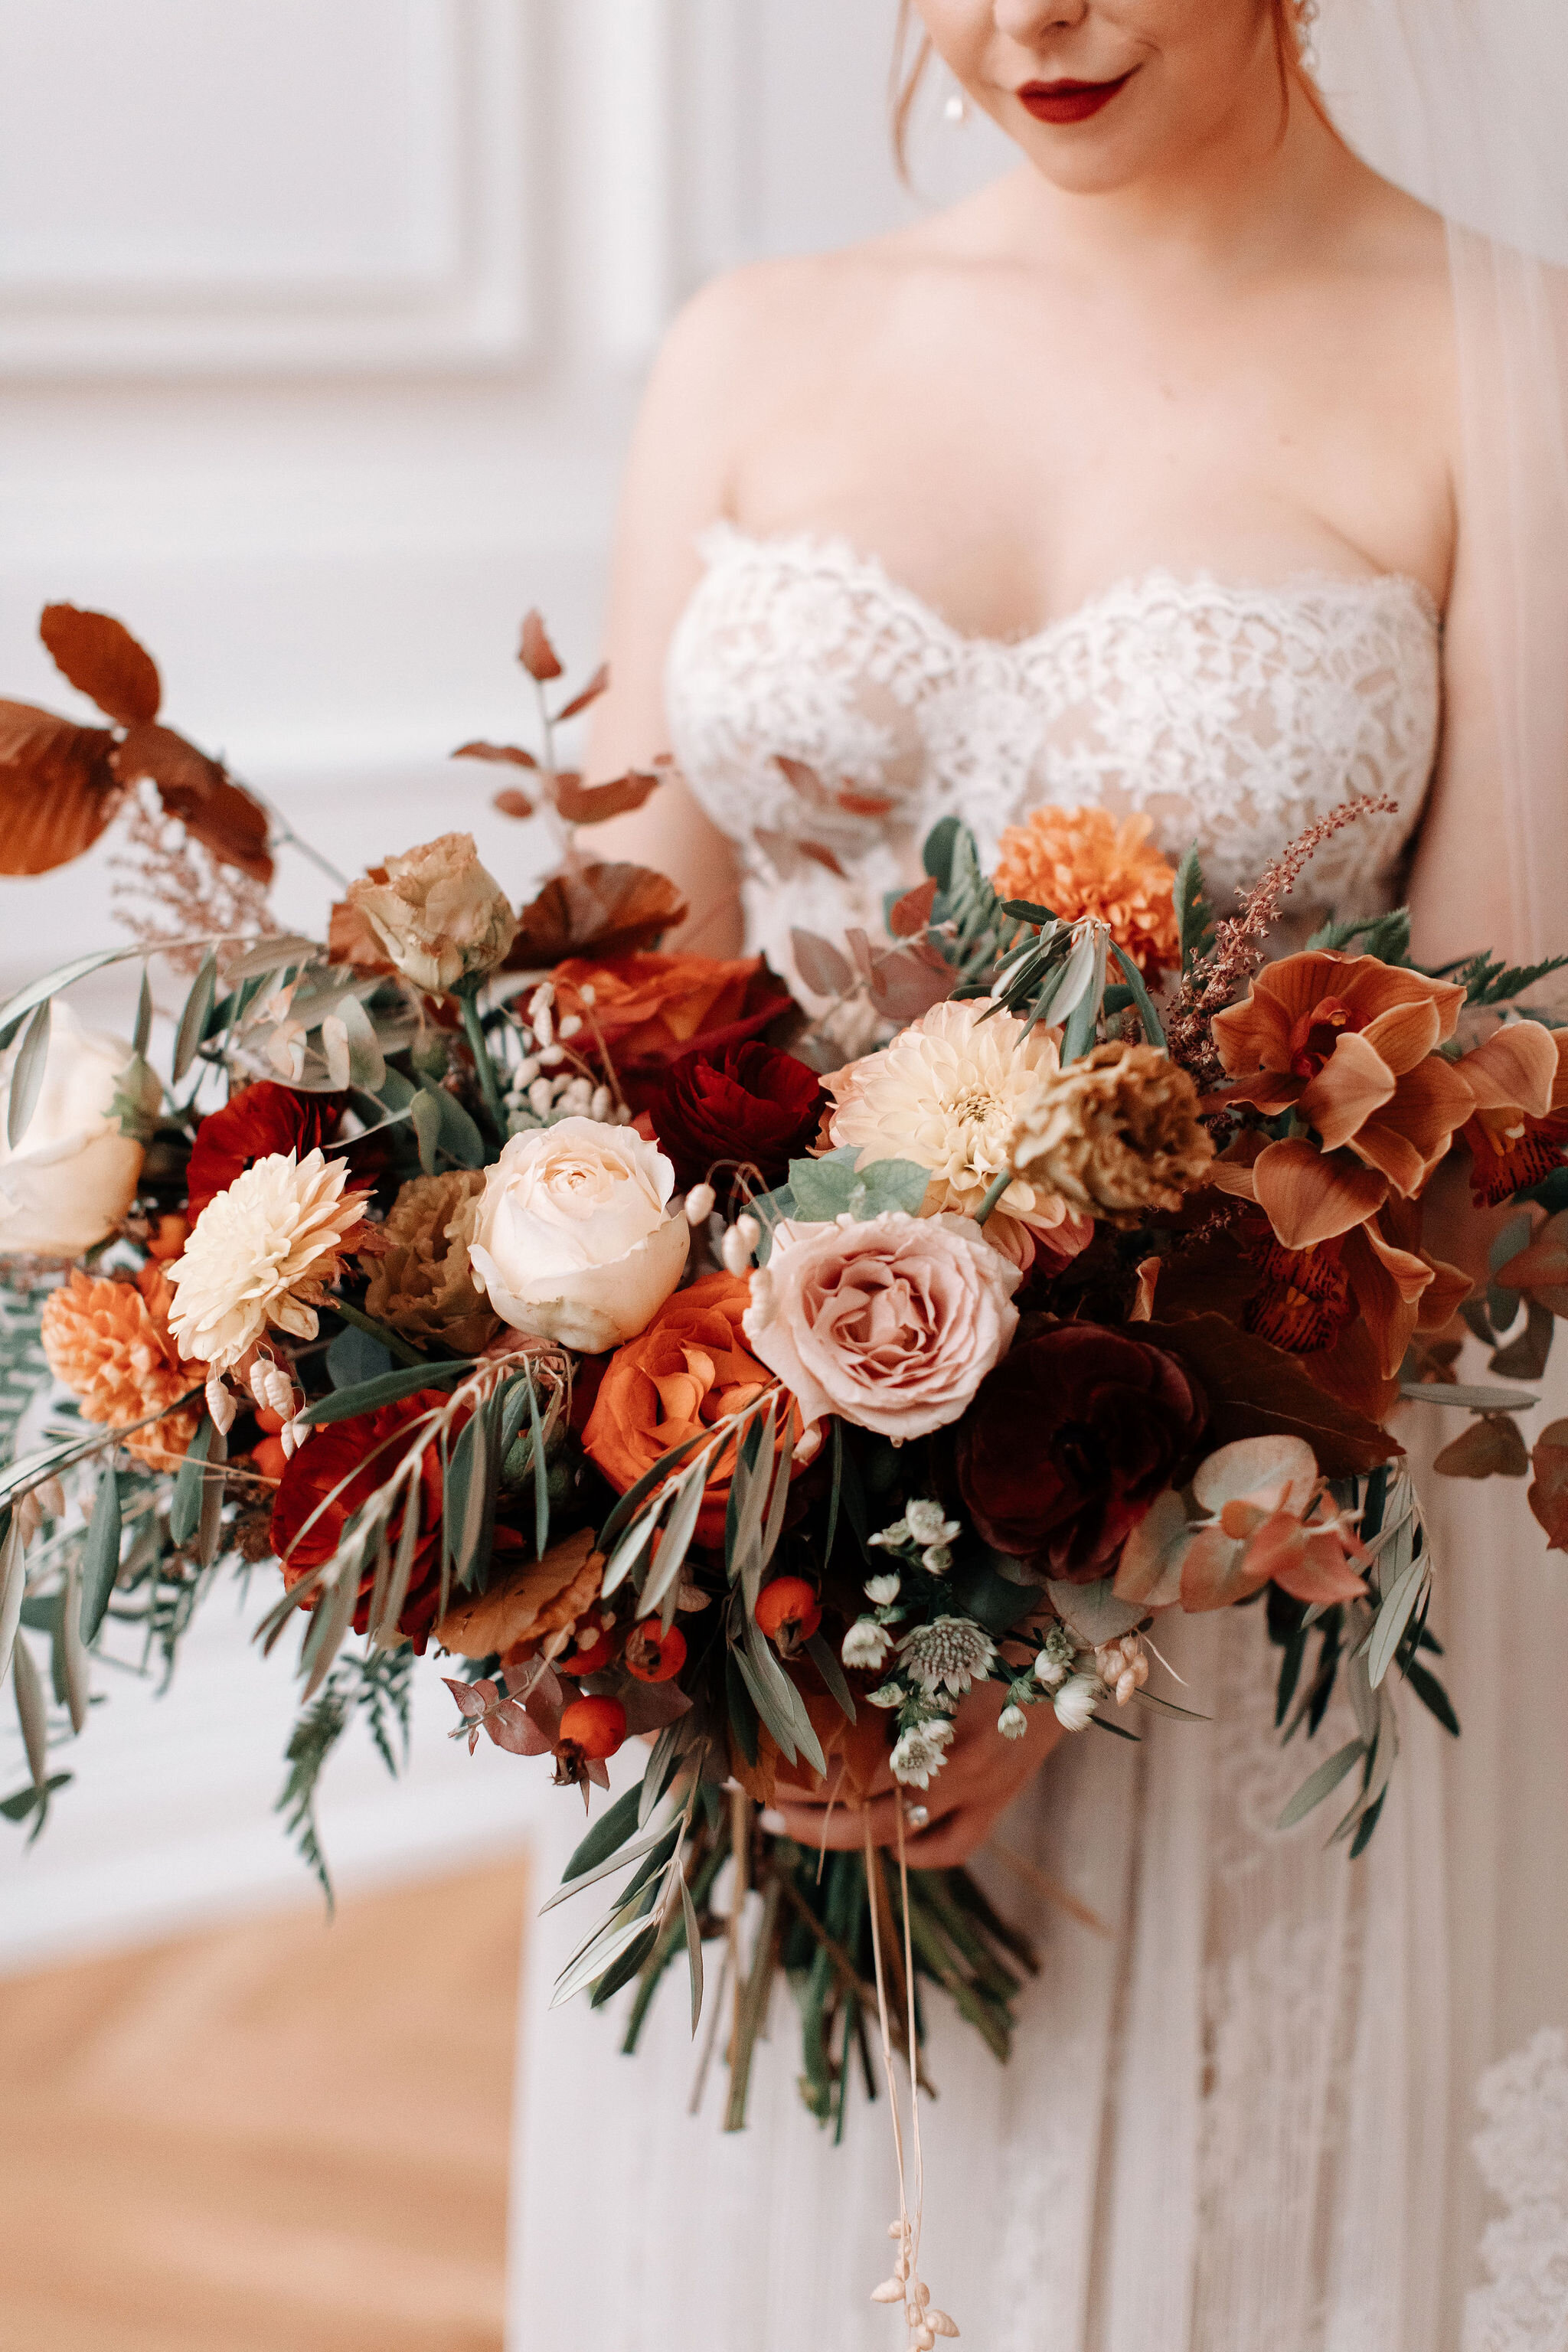 Bridal bouquet in shades of burnt orange, rust, burgundy, copper, and greenery, with dahlias, ranunculus, rosehips, and olive branches. Nashville wedding floral designer.